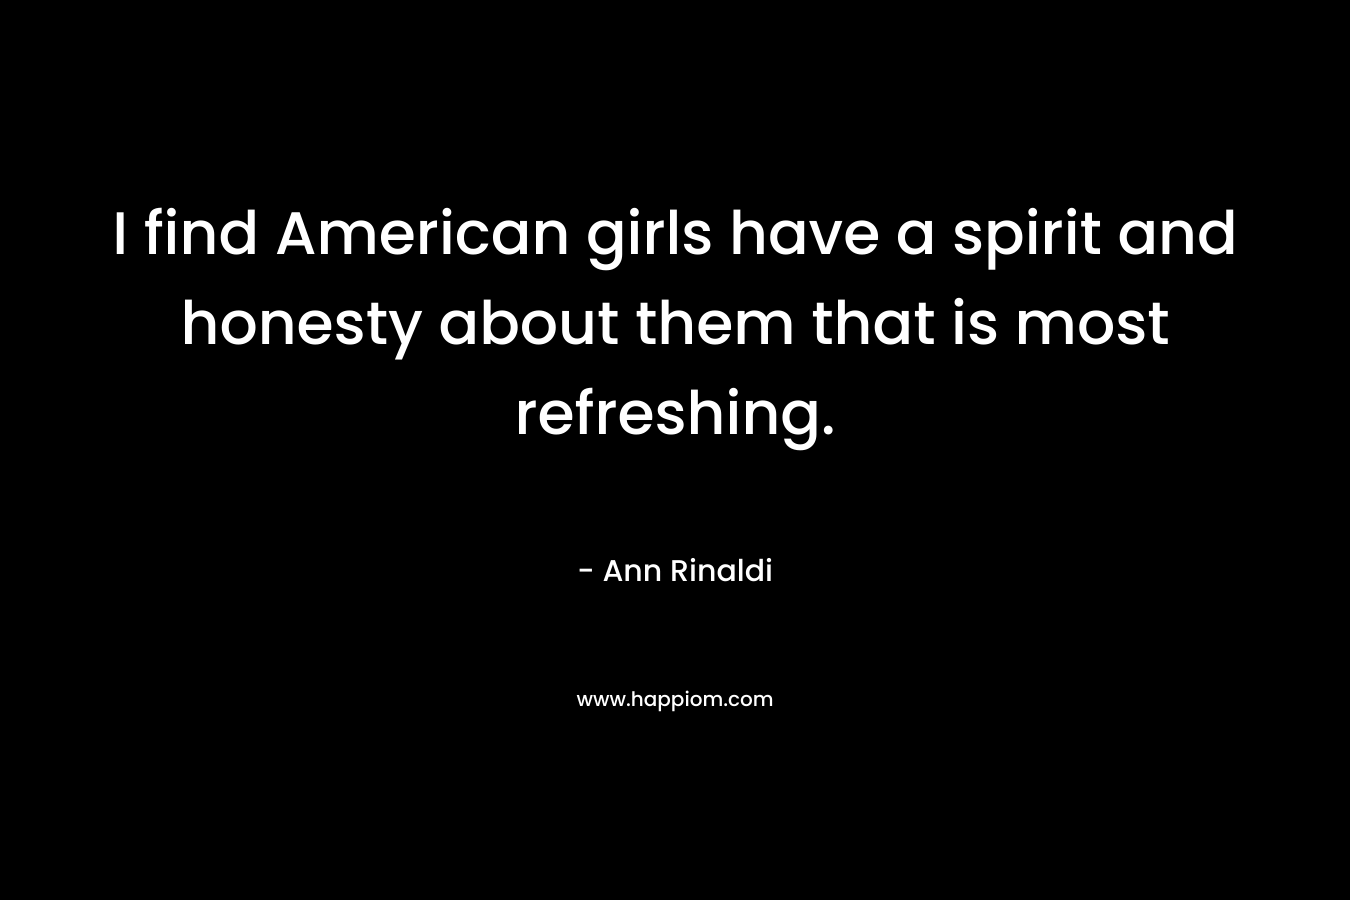 I find American girls have a spirit and honesty about them that is most refreshing. – Ann Rinaldi